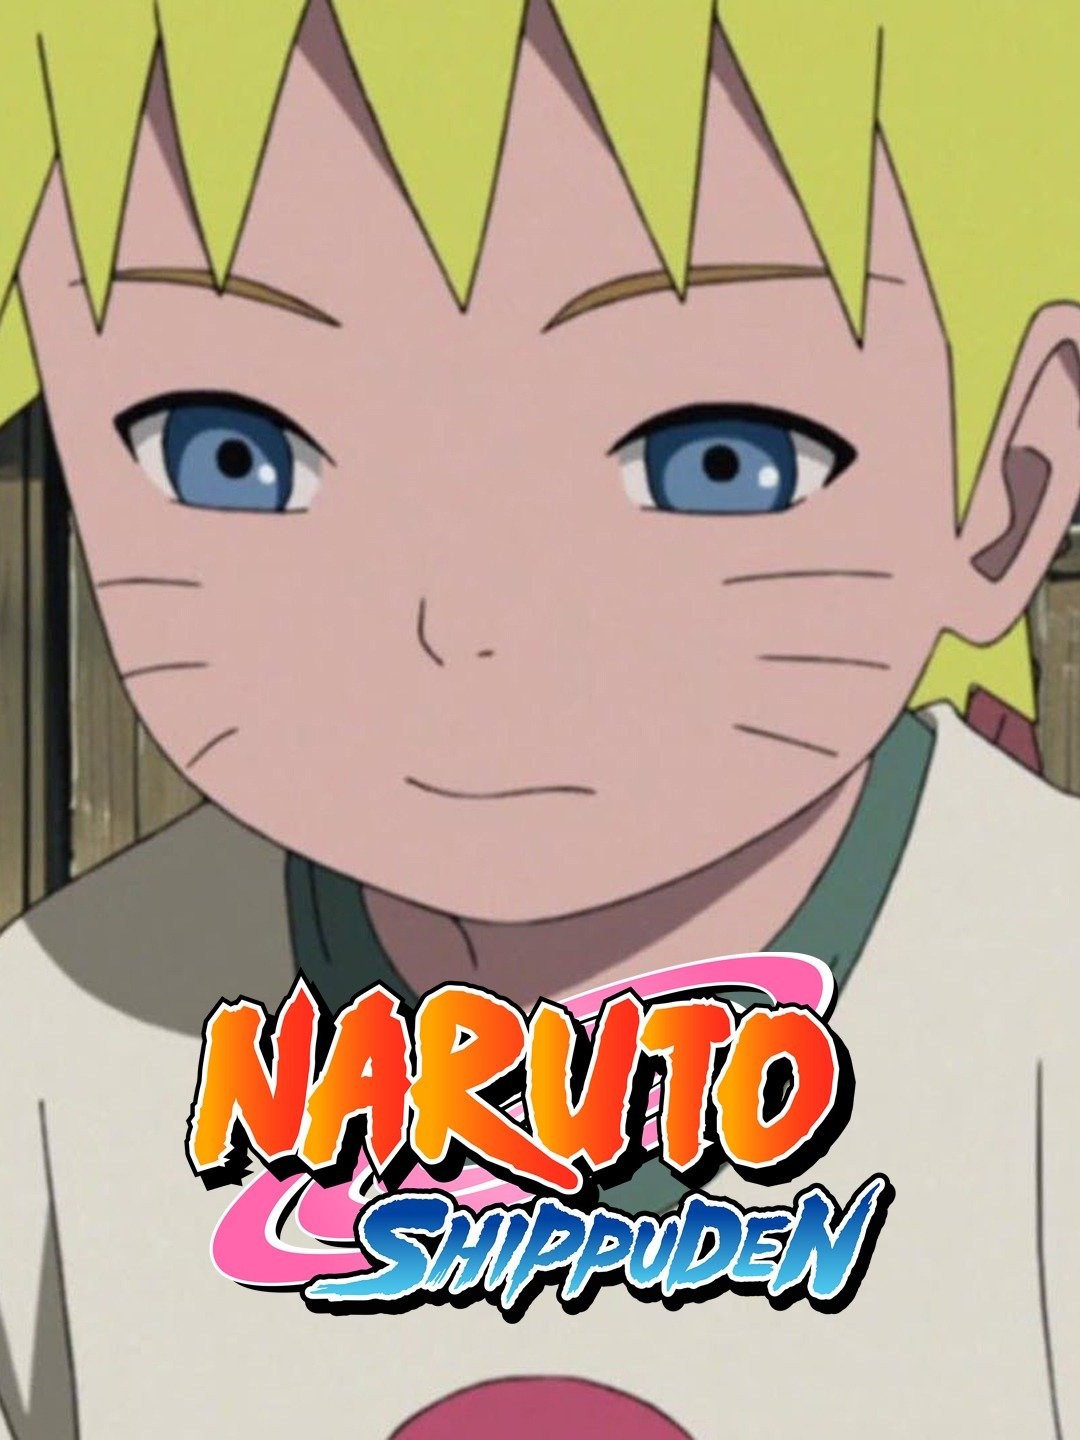 New Naruto anime: Release date, episode count, and more